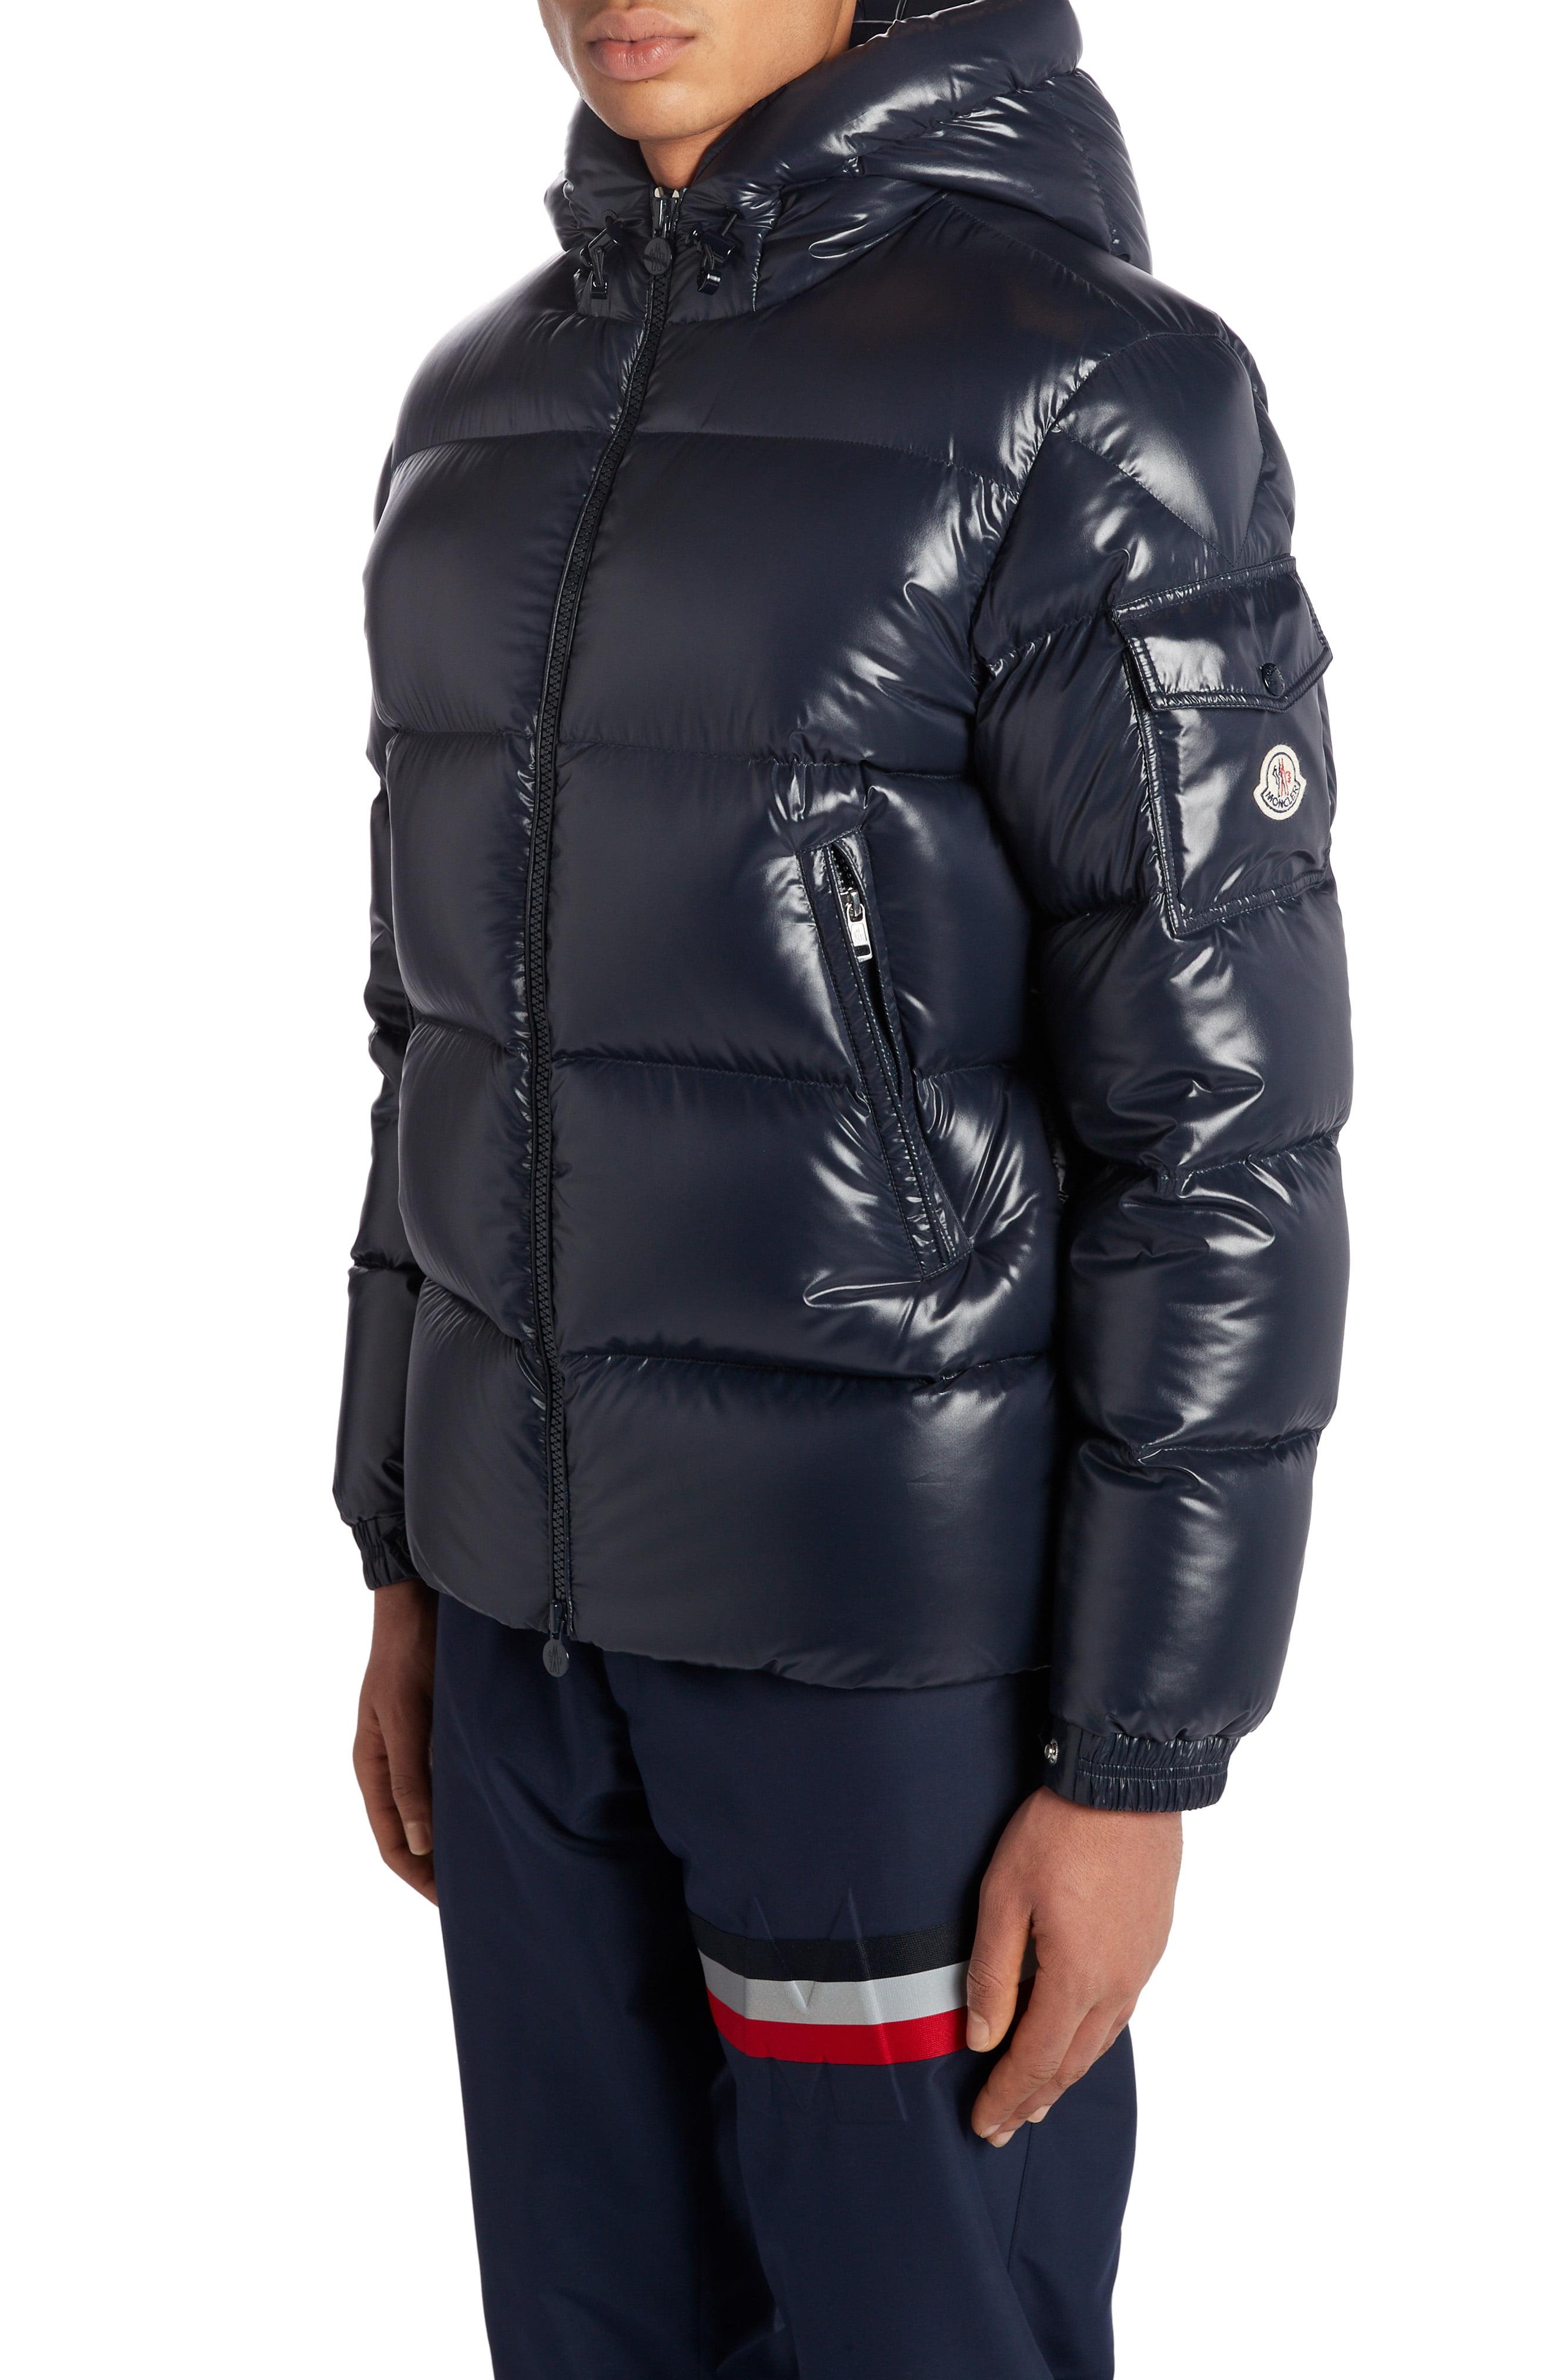 Moncler Ecrins Hooded Down Puffer Jacket in Navy (Blue) for Men - Lyst